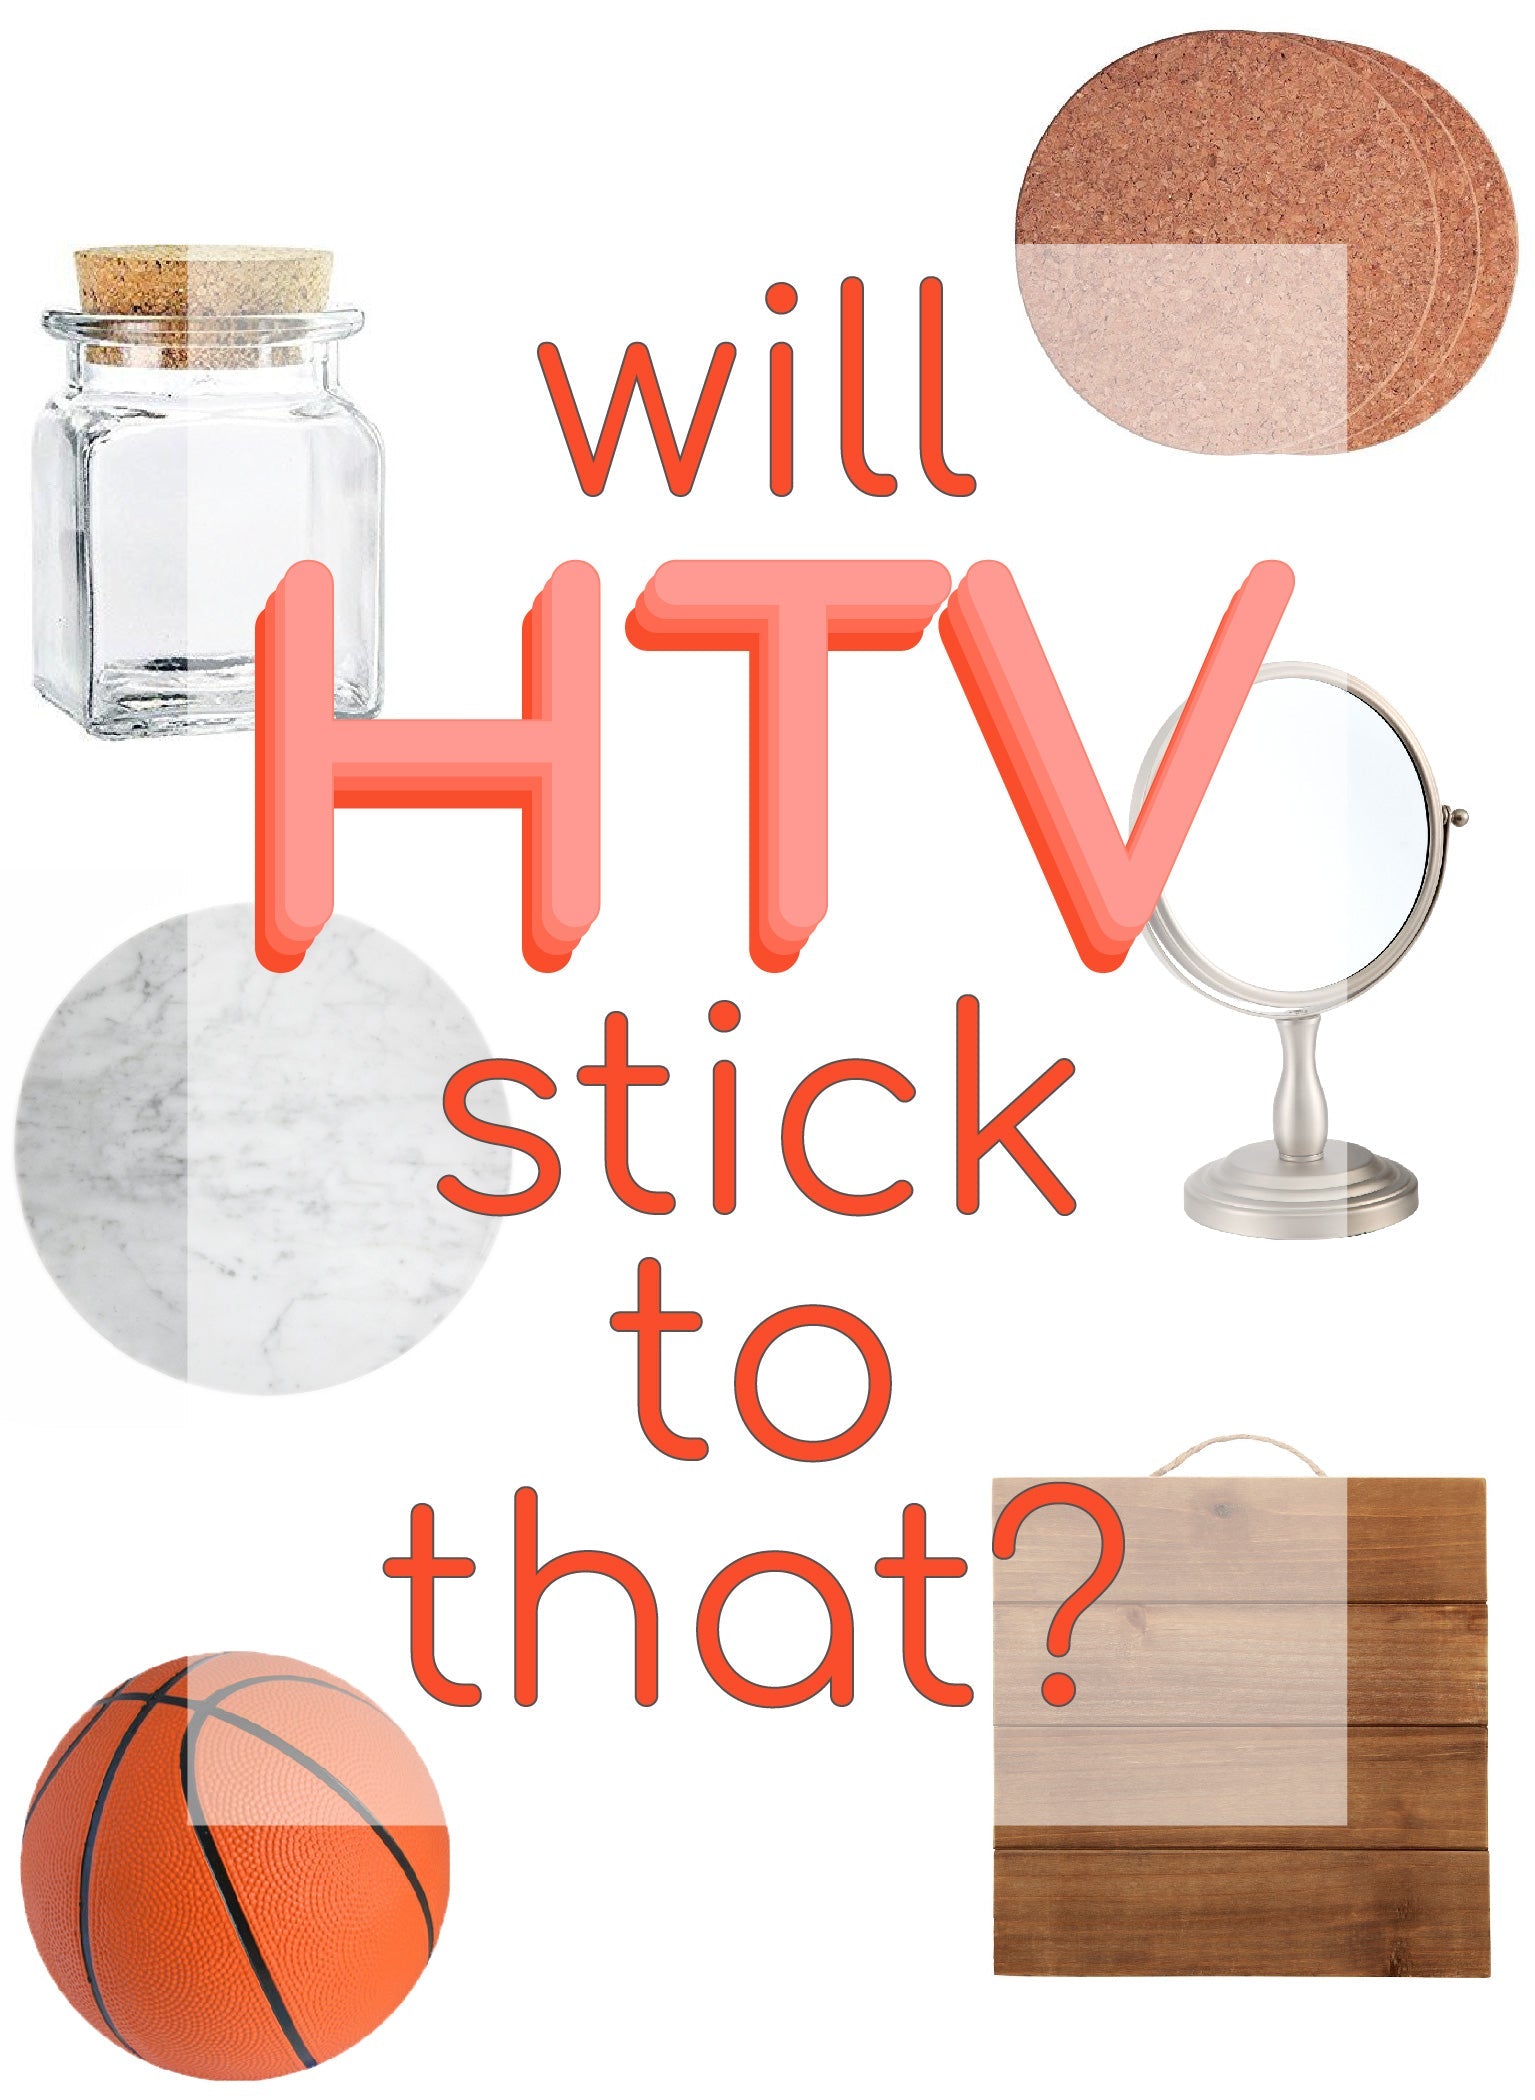 What Surfaces Will HTV stick to?